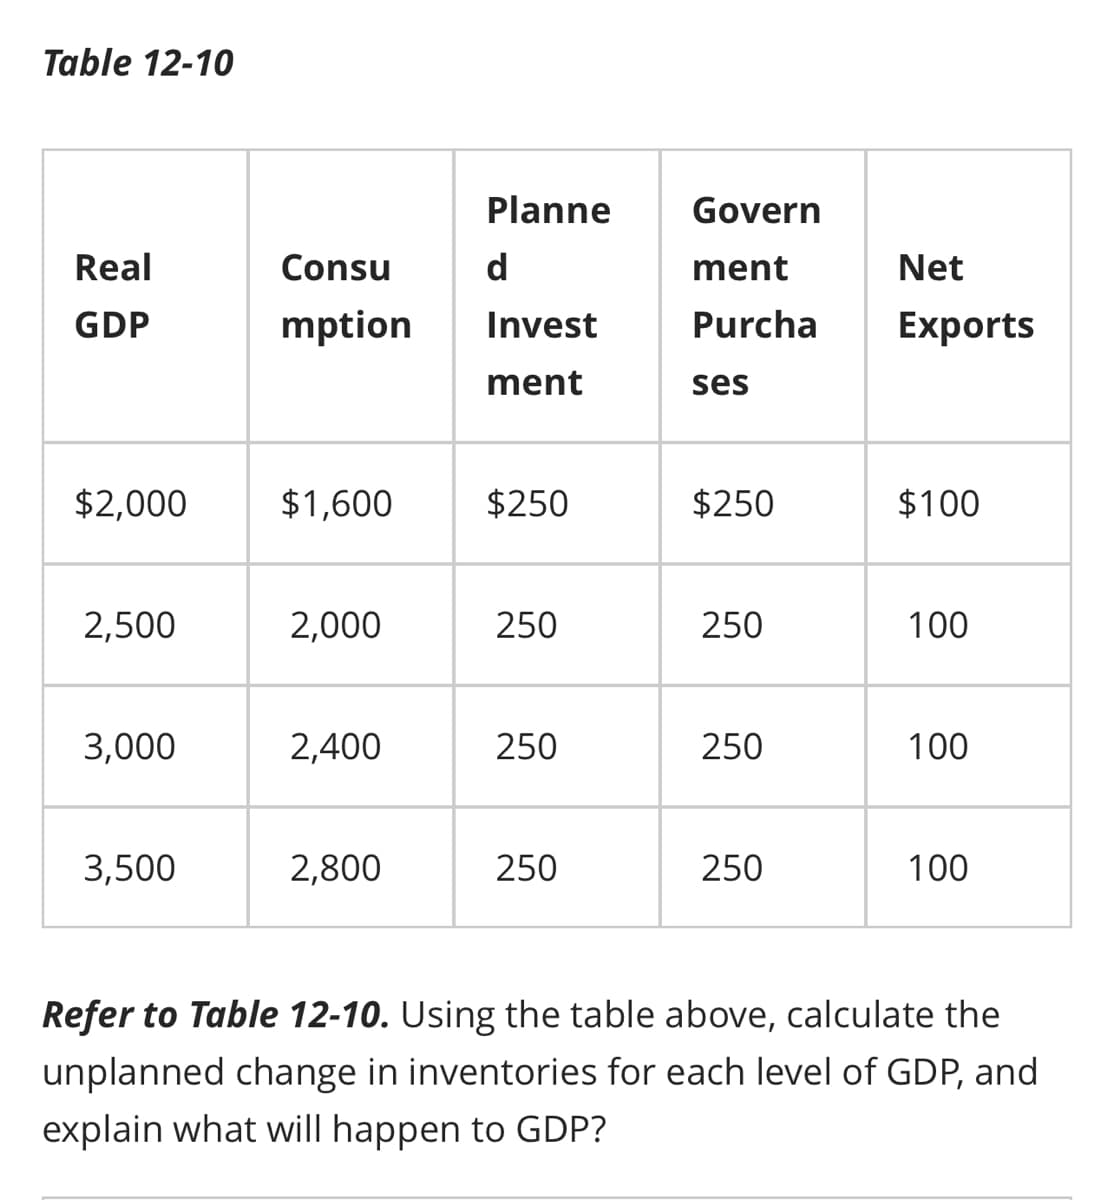 Table 12-10
Real
GDP
$2,000
2,500
3,000
3,500
Consu
mption
$1,600
2,000
2,400
2,800
Planne
d
Invest
ment
$250
250
250
250
Govern
ment
Net
Purcha Exports
ses
$250
250
250
250
$100
100
100
100
Refer to Table 12-10. Using the table above, calculate the
unplanned change in inventories for each level of GDP, and
explain what will happen to GDP?